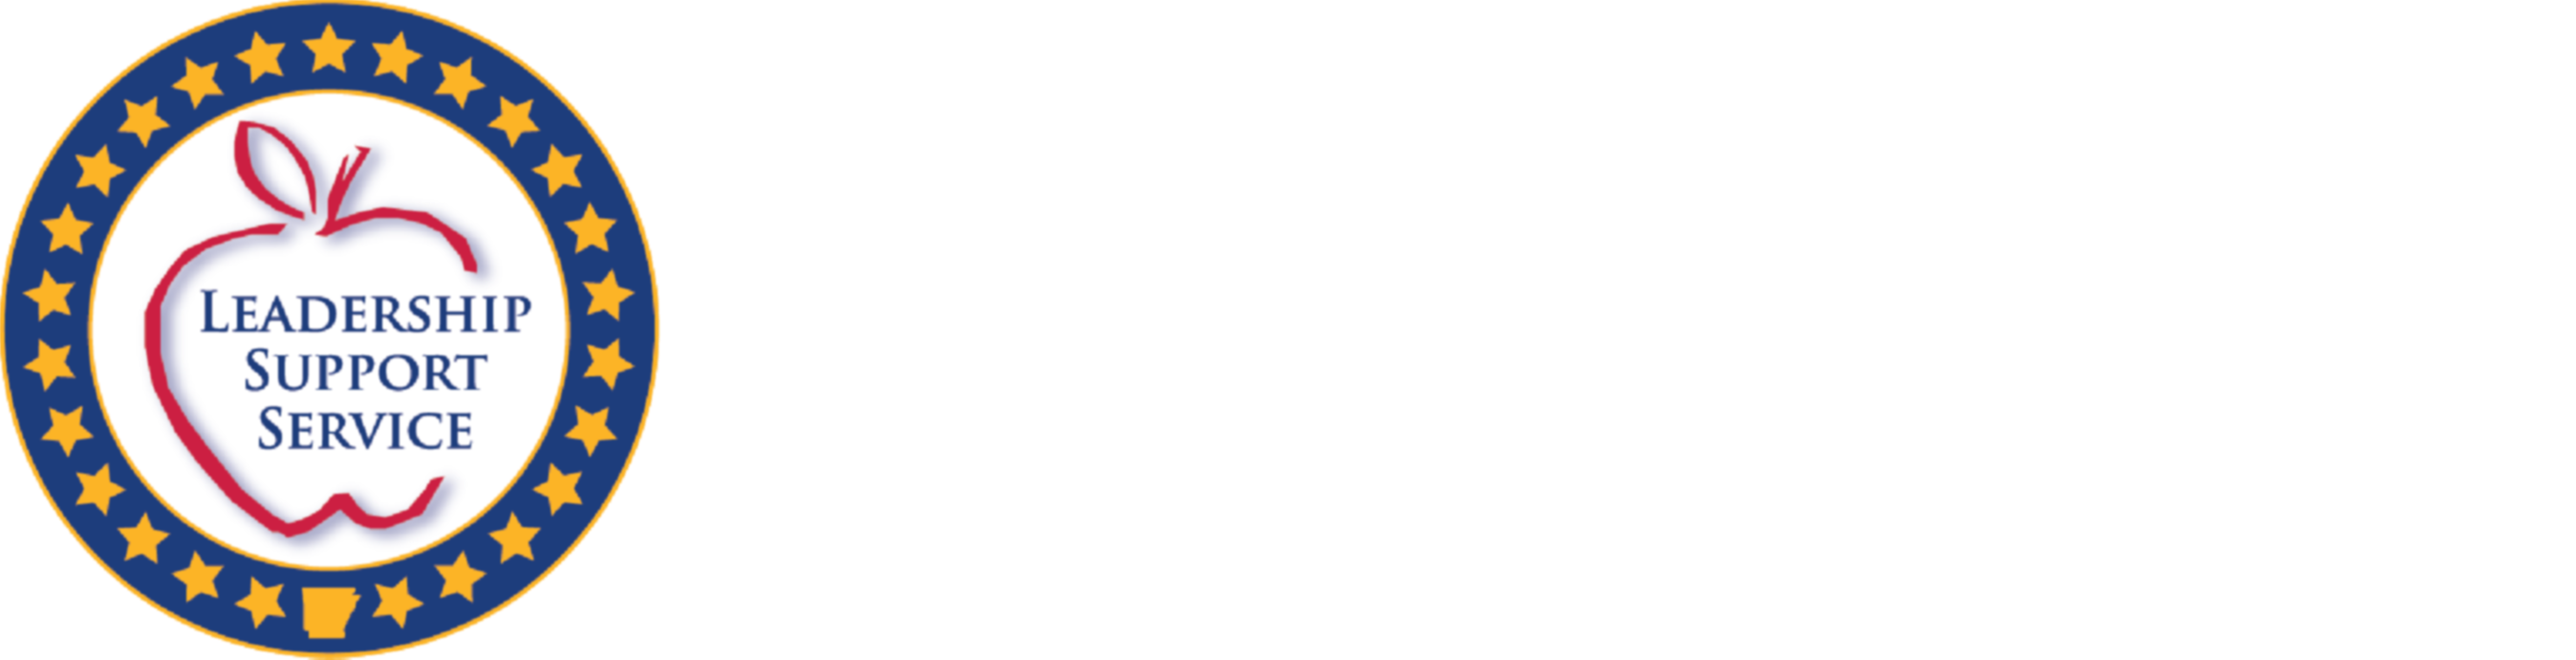 State Required